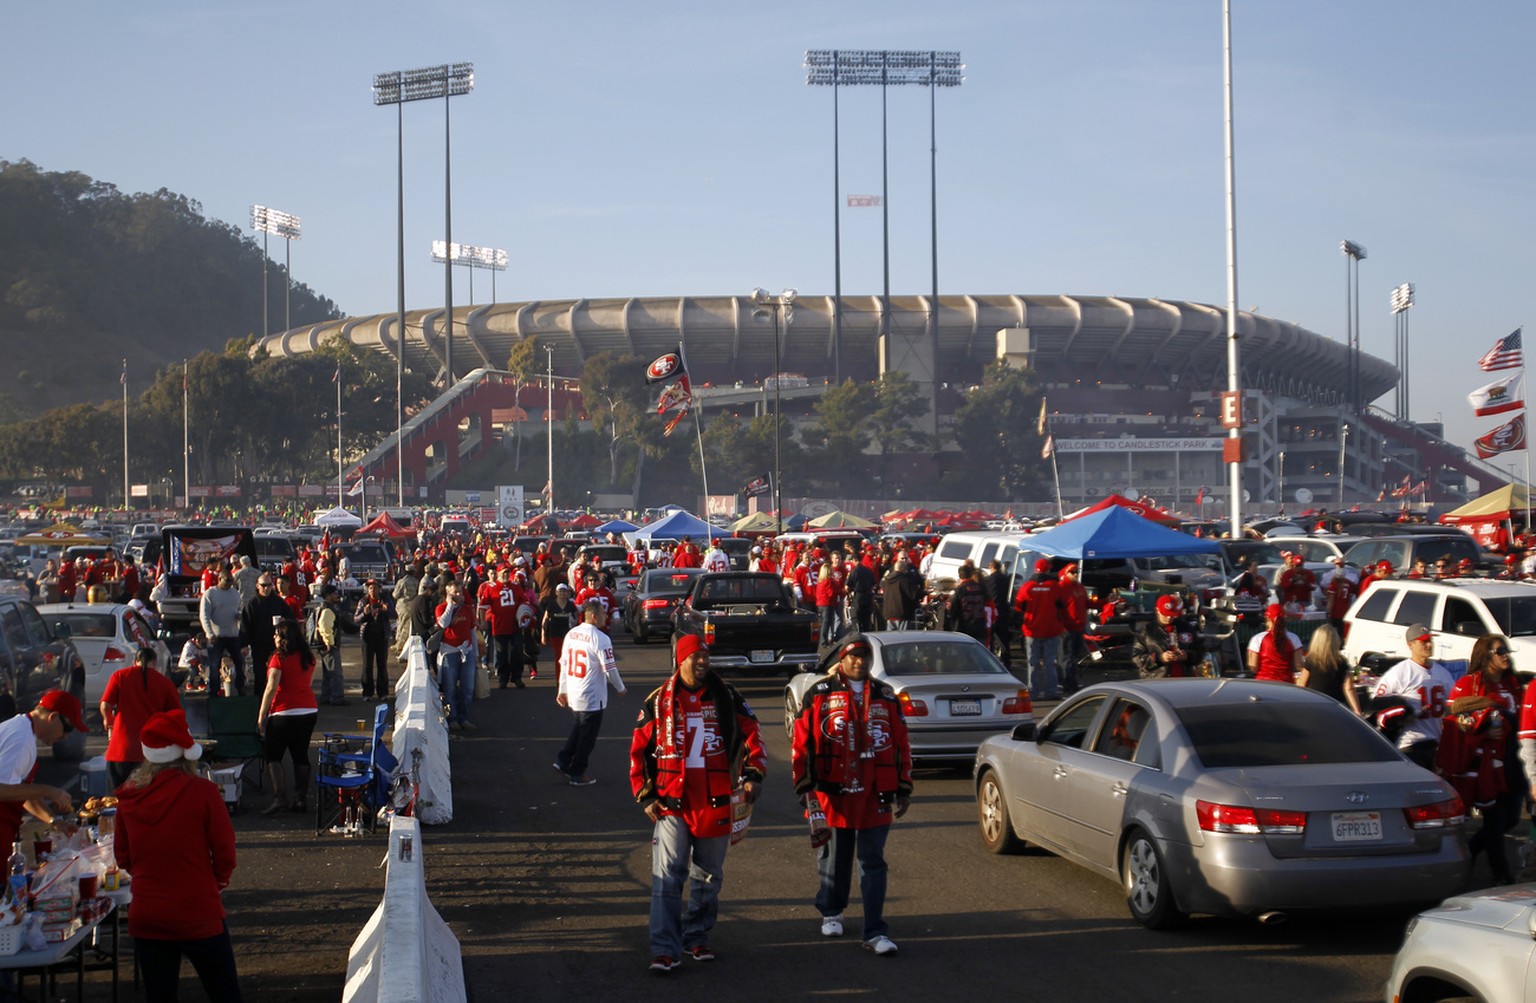 San Francisco 49ers fans tailgate in the parking lot of Candlestick Park before the 49ers game against the Atlanta Falcons NFL football game in San Francisco, Monday, Dec. 23, 2013. (AP Photo/Matt Sum ...